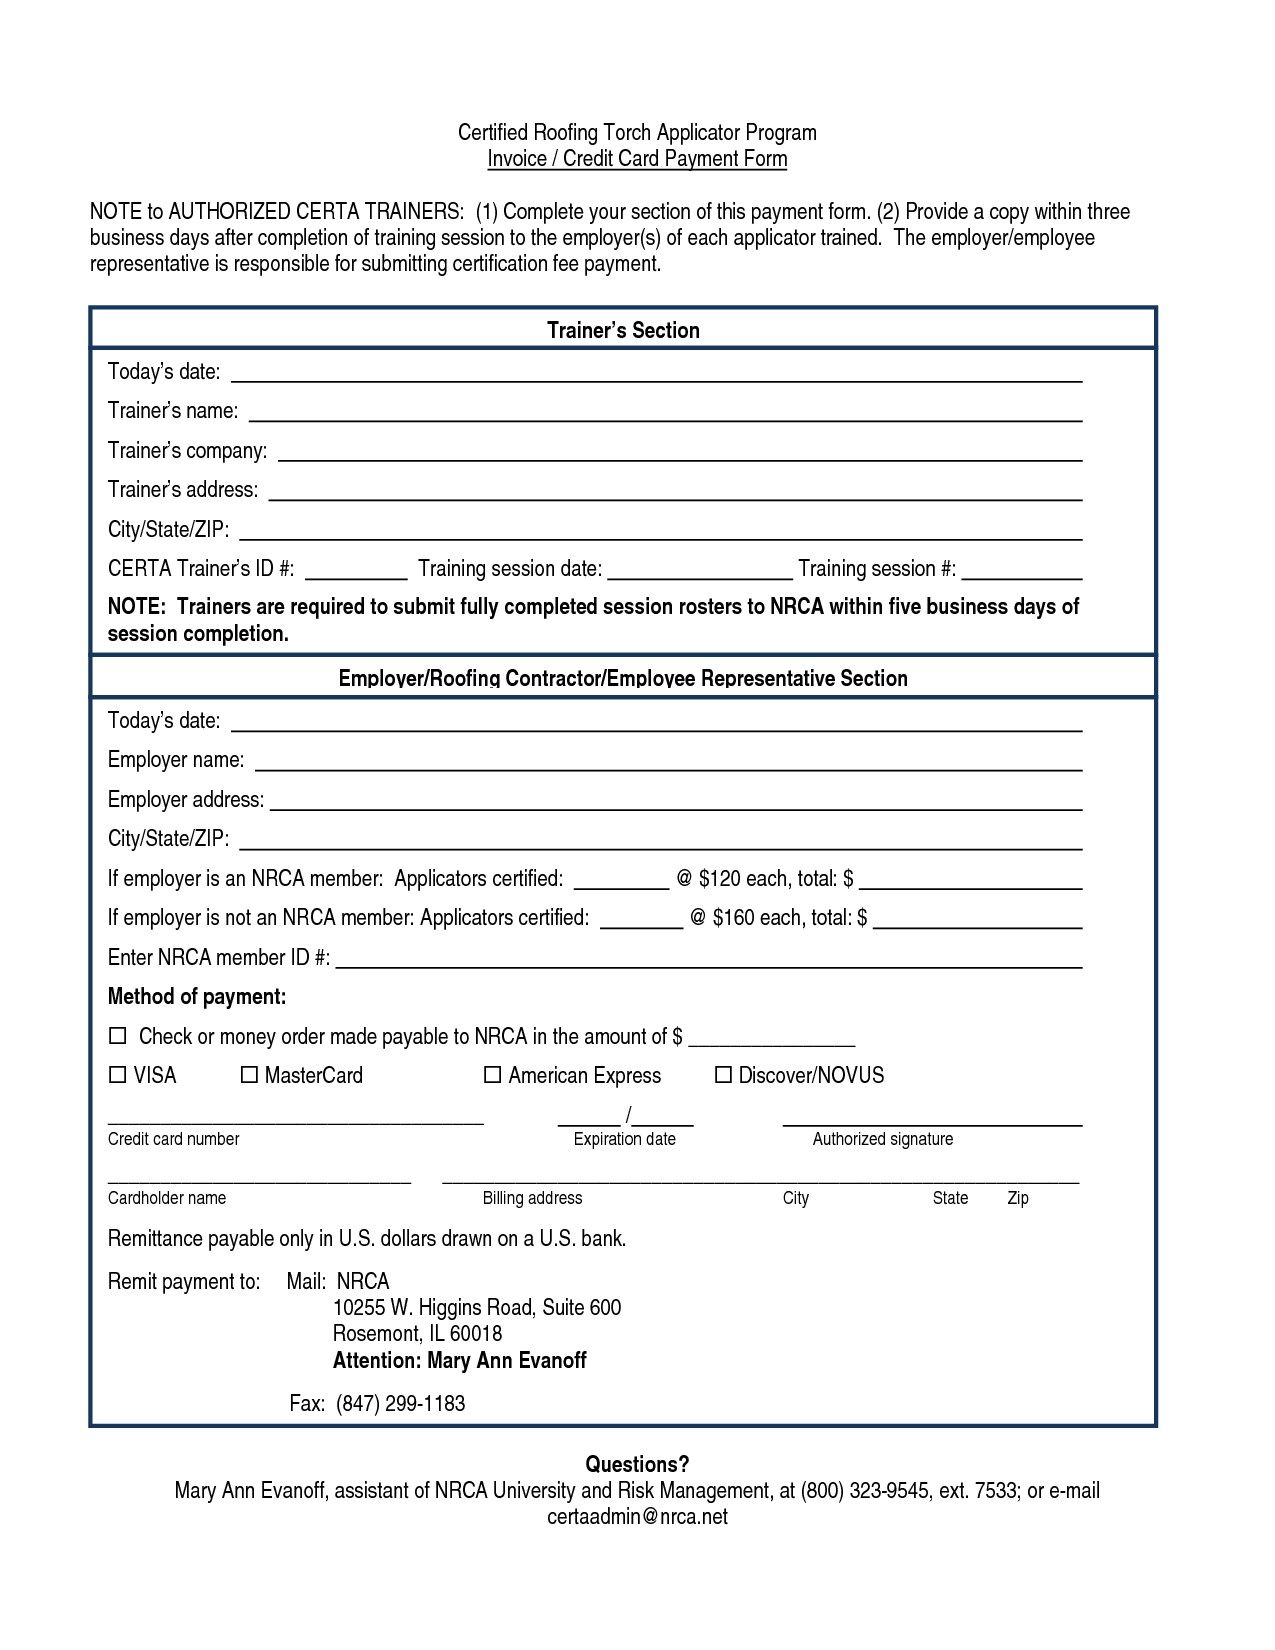 Free Roof Certification Template Form Download Monster Regarding Roof Certification Template